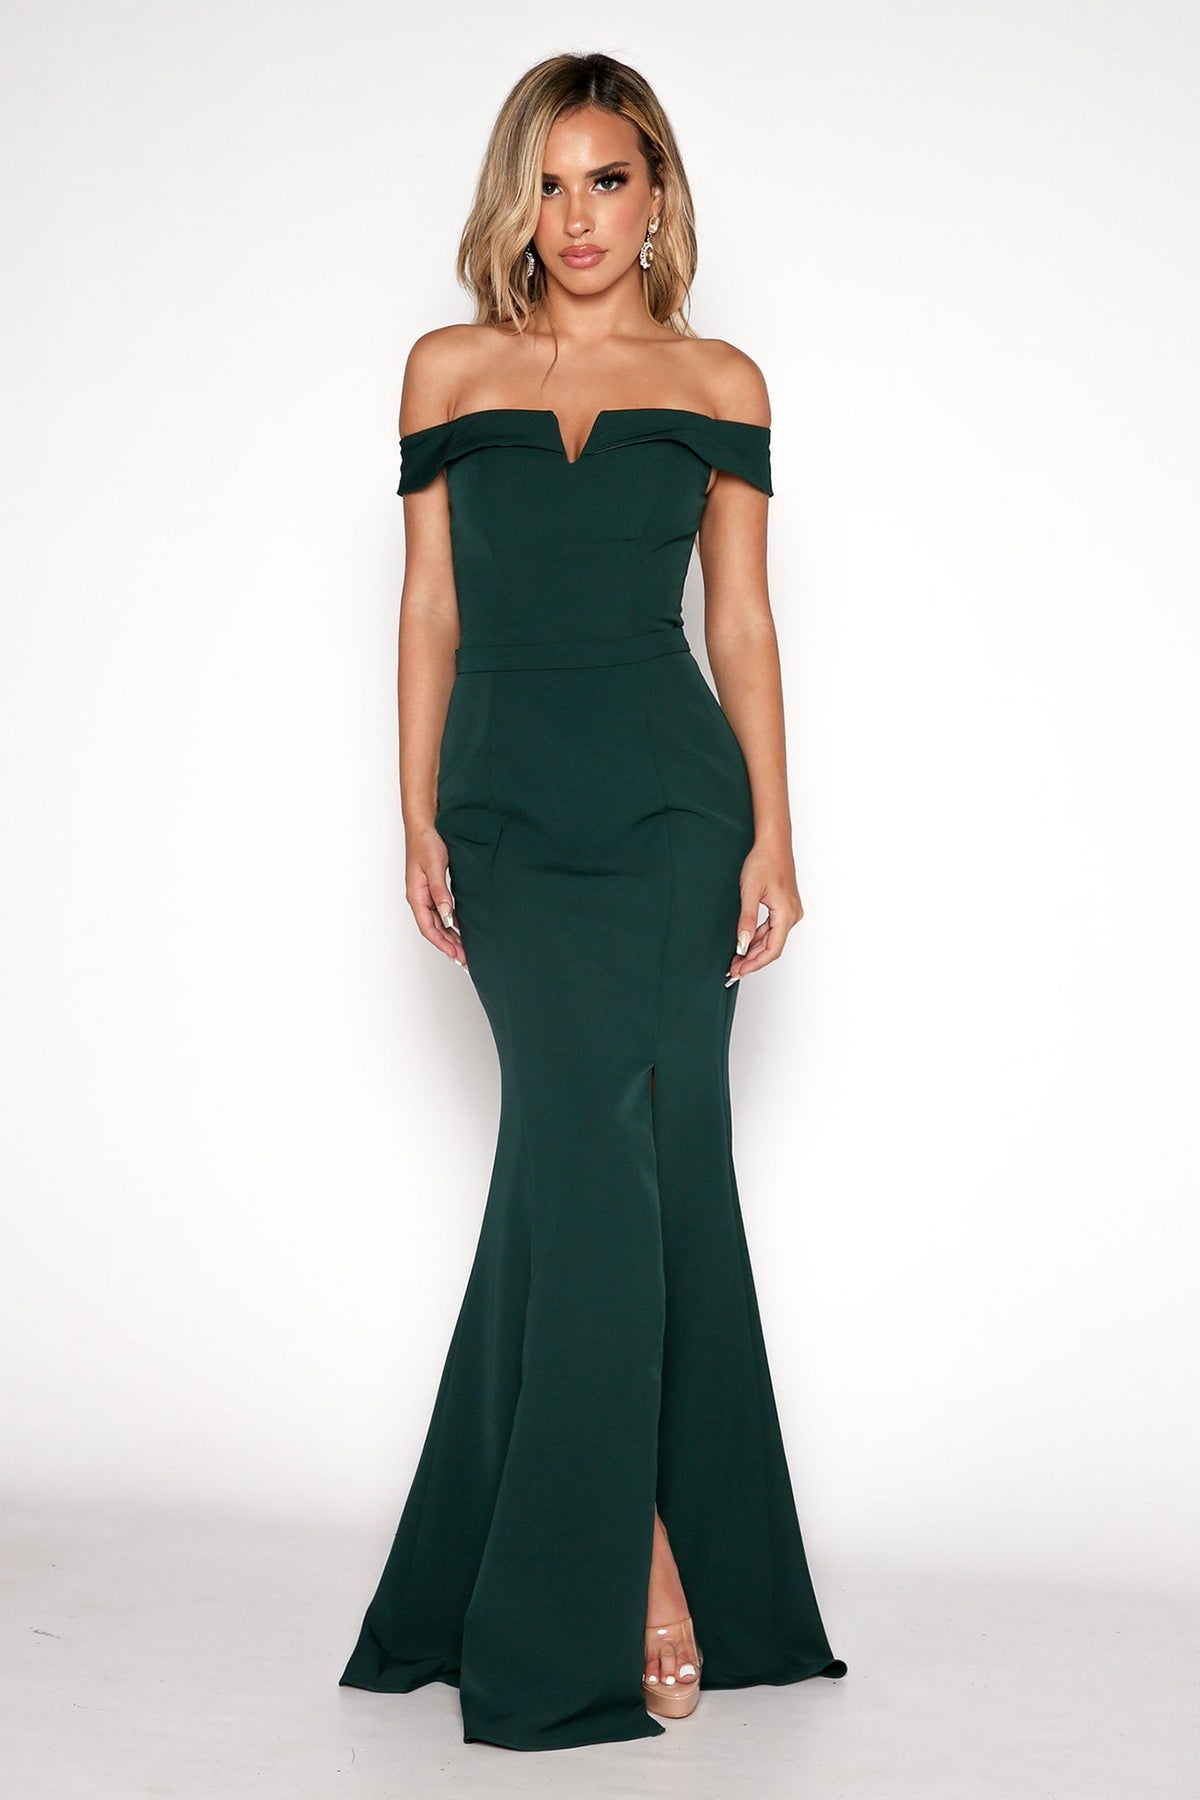 Dark Green Off Shoulder Full Length Maxi Dress with V Cut Out Neckline and Collar Detail, and a Belt Detail at Waistline and Slit on the Left Leg